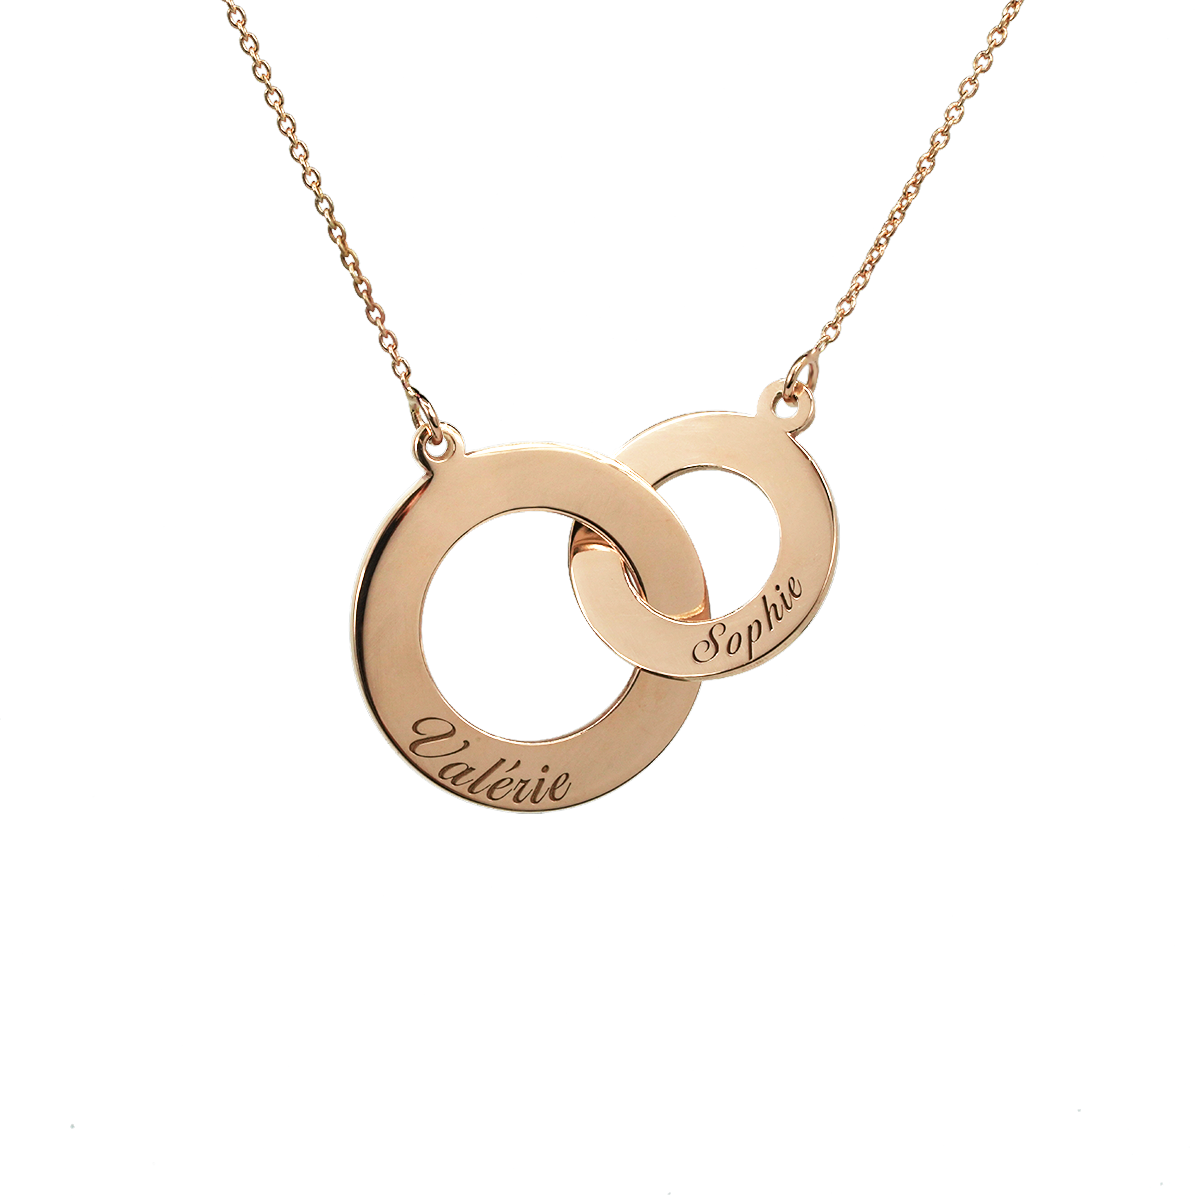 Complicity Necklace - 16mm and 12mm rings